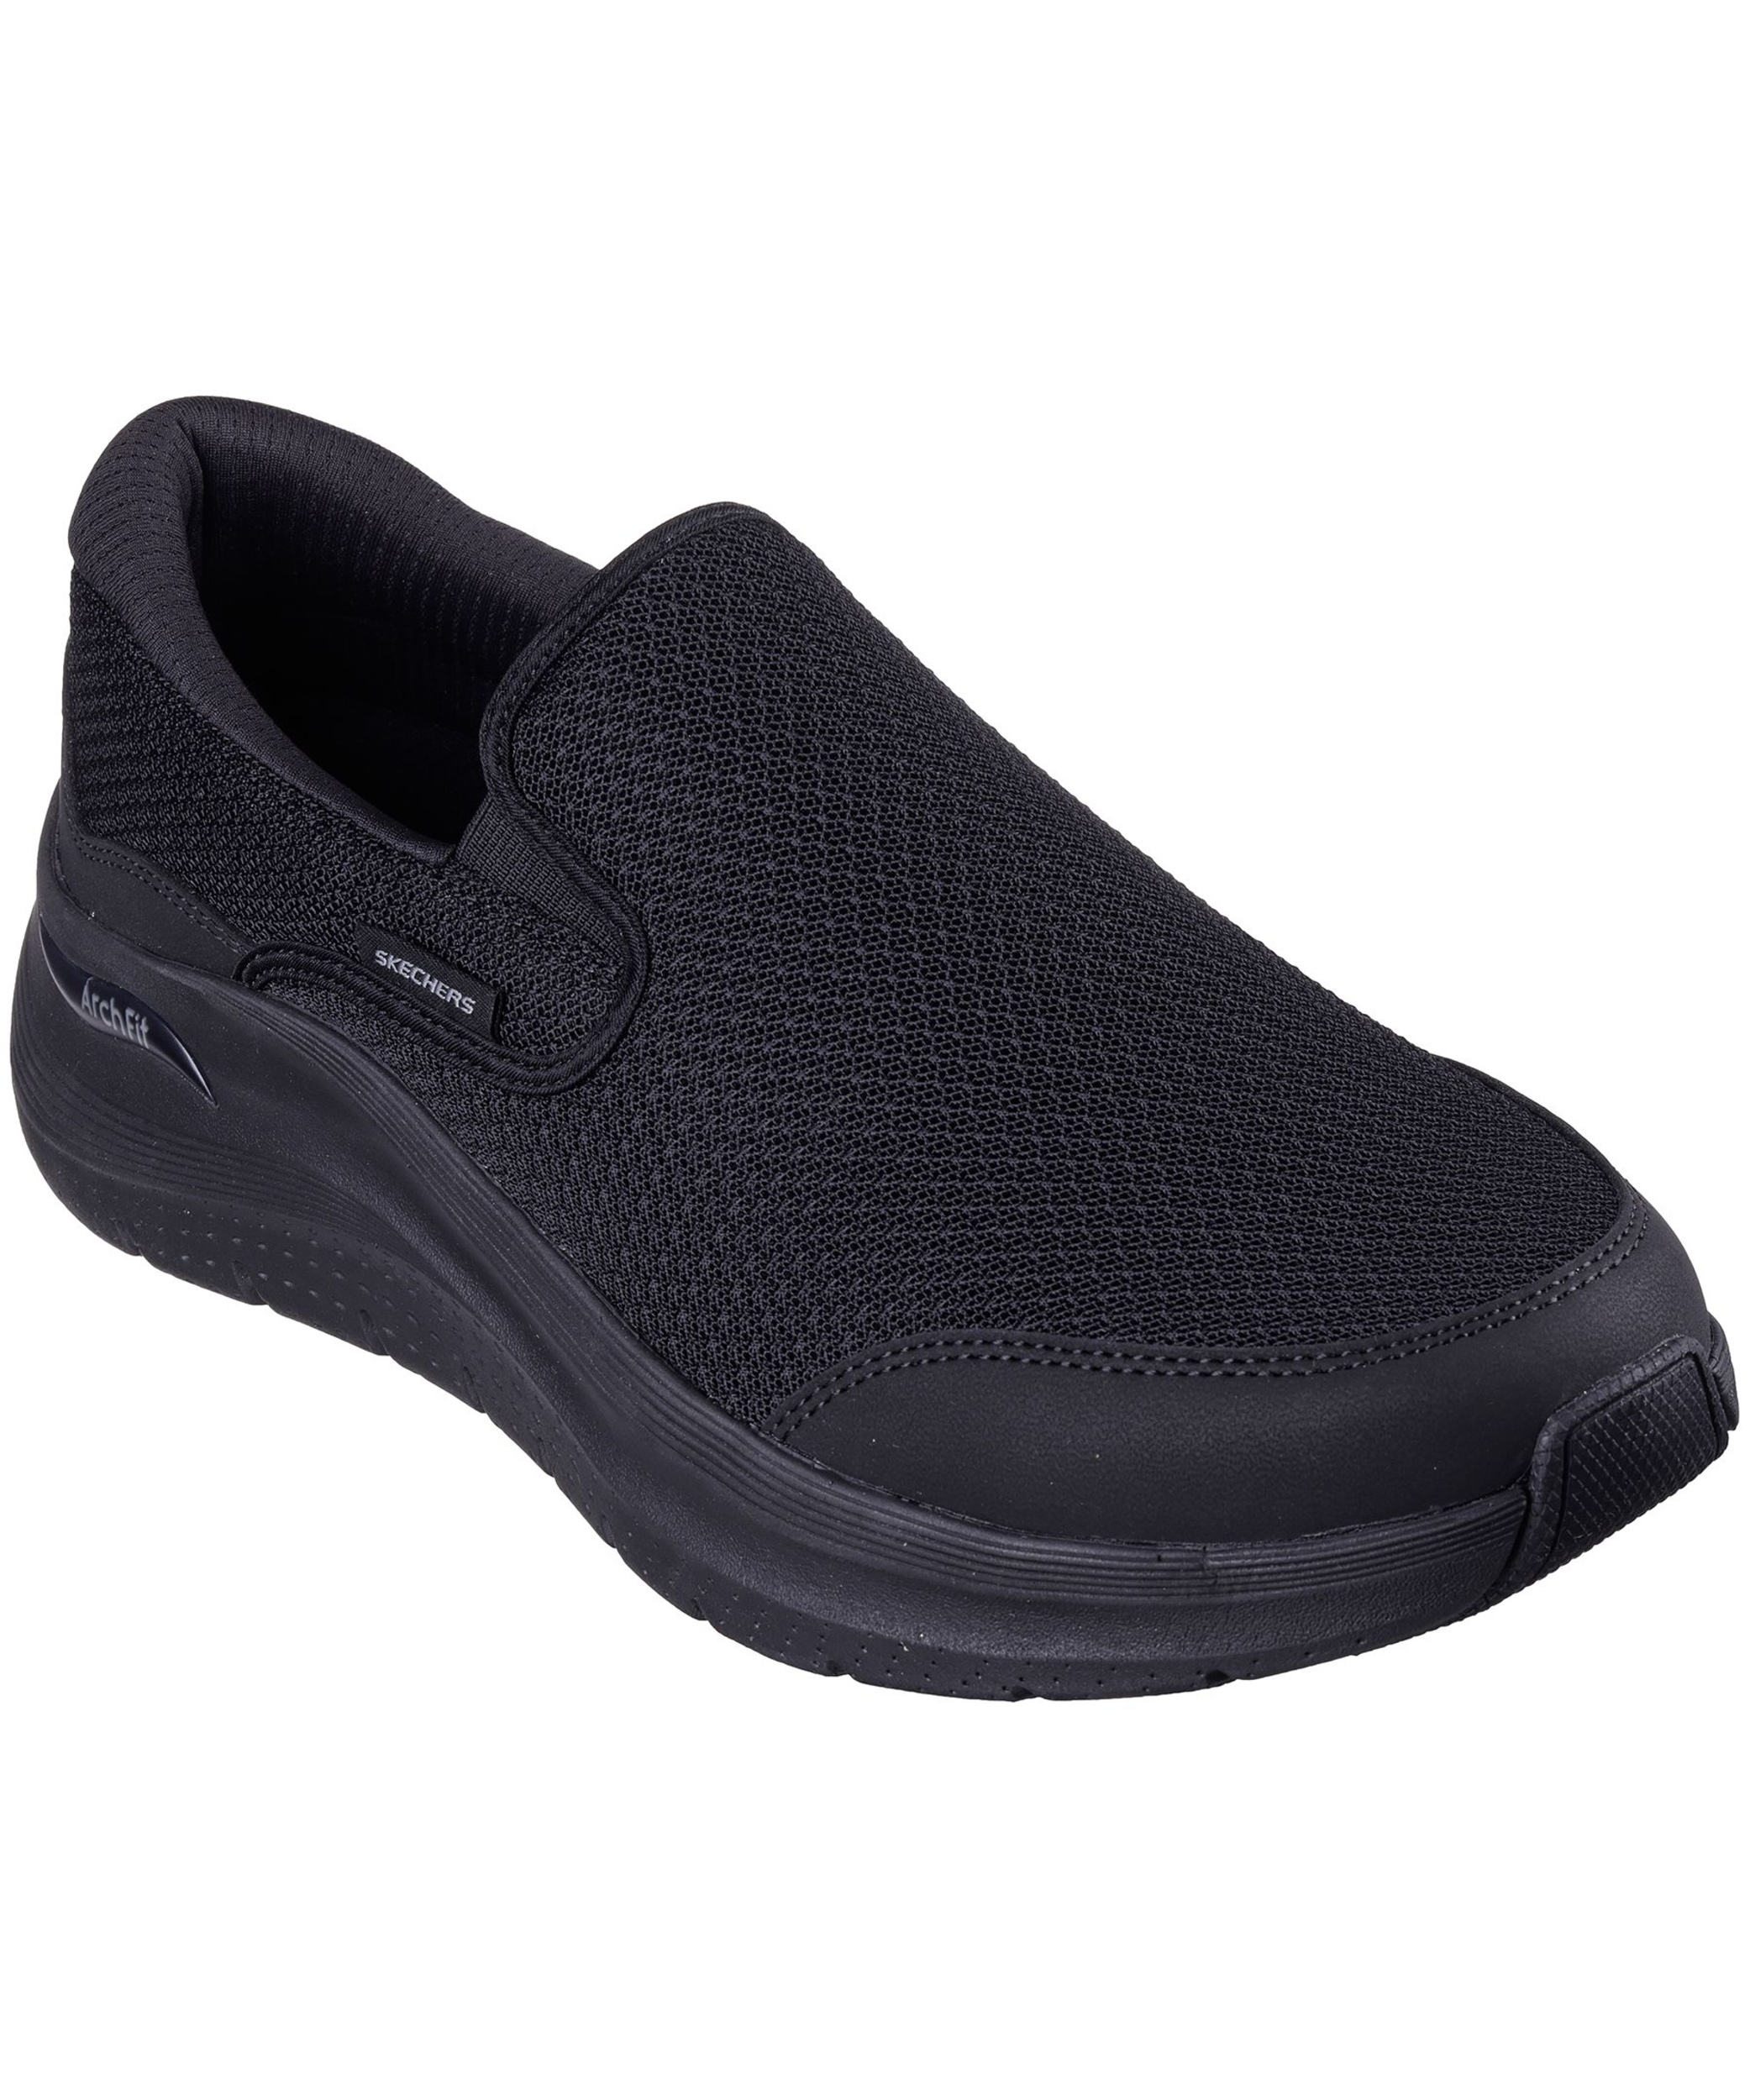 Skechers Men's Arch Fit 2.0 Slip On Shoes - Wide Fit | Marks